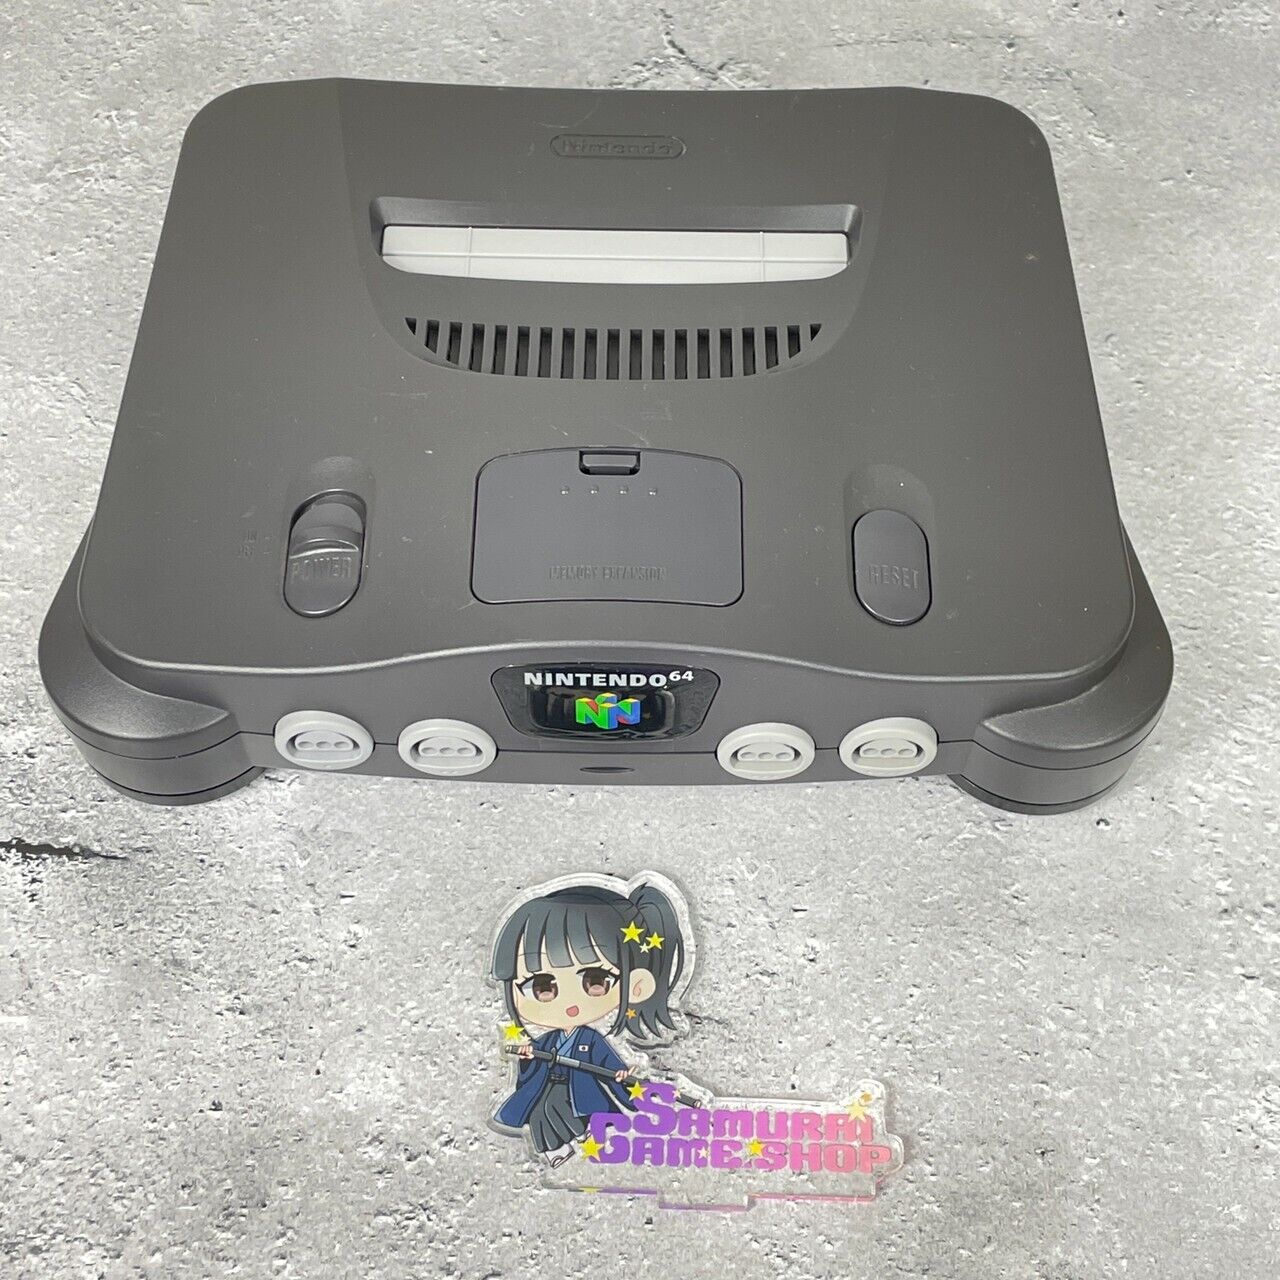 Nintendo 64 N64 Black Console with OEM Controller and Cable set Japanese Edition